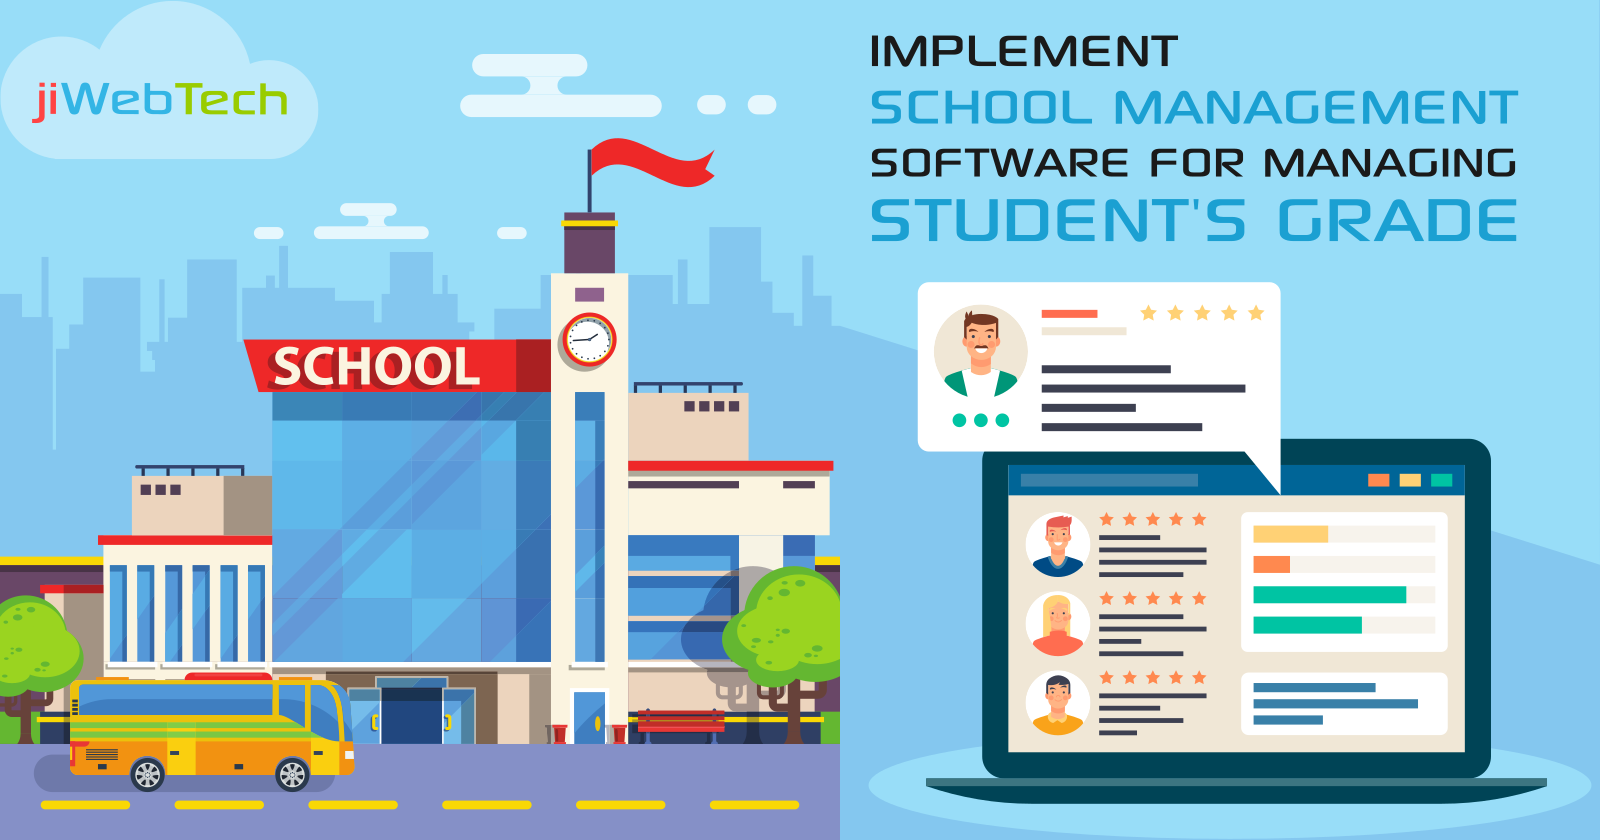 Implement School Management Software For Managing Student's Grade